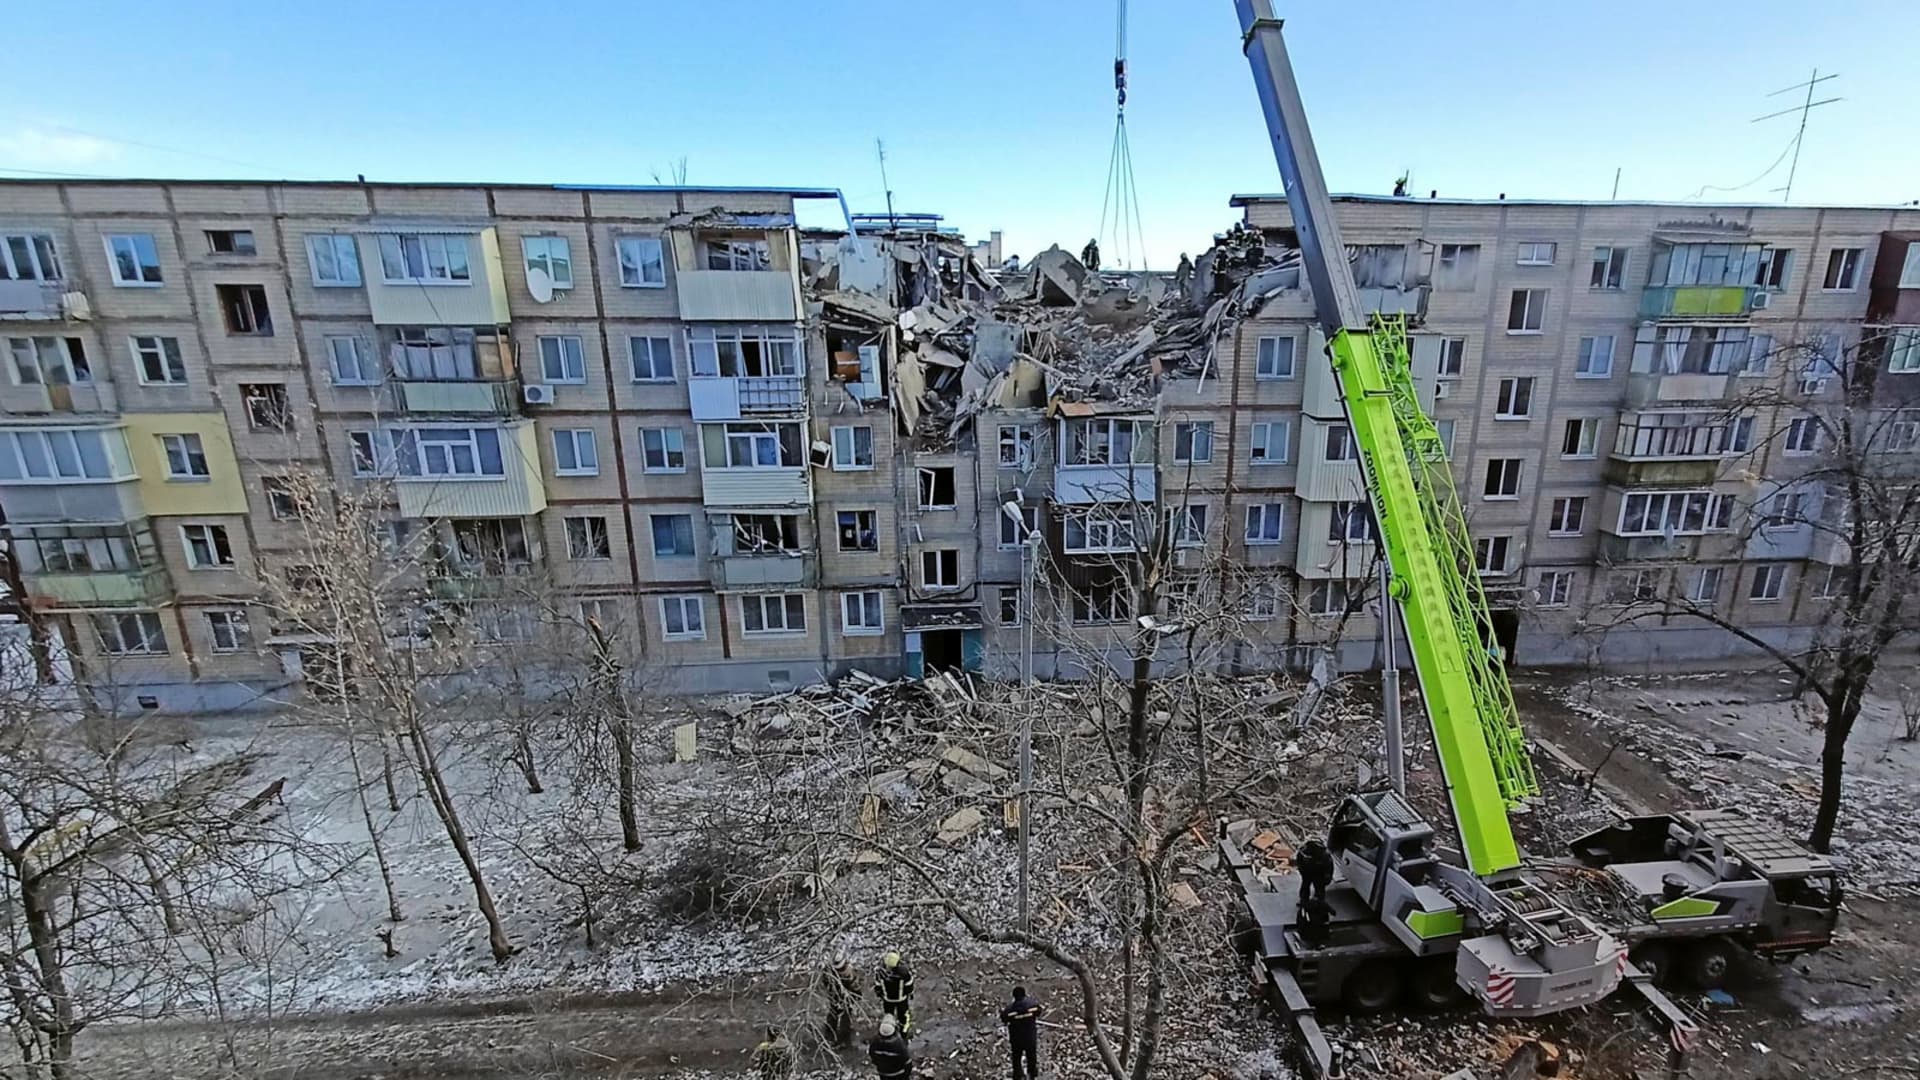 Rescuers remove debris from a residential building damaged by an airstrike, as Russia?s attack on Ukraine continues, in Kharkiv, Ukraine March 15, 2022.